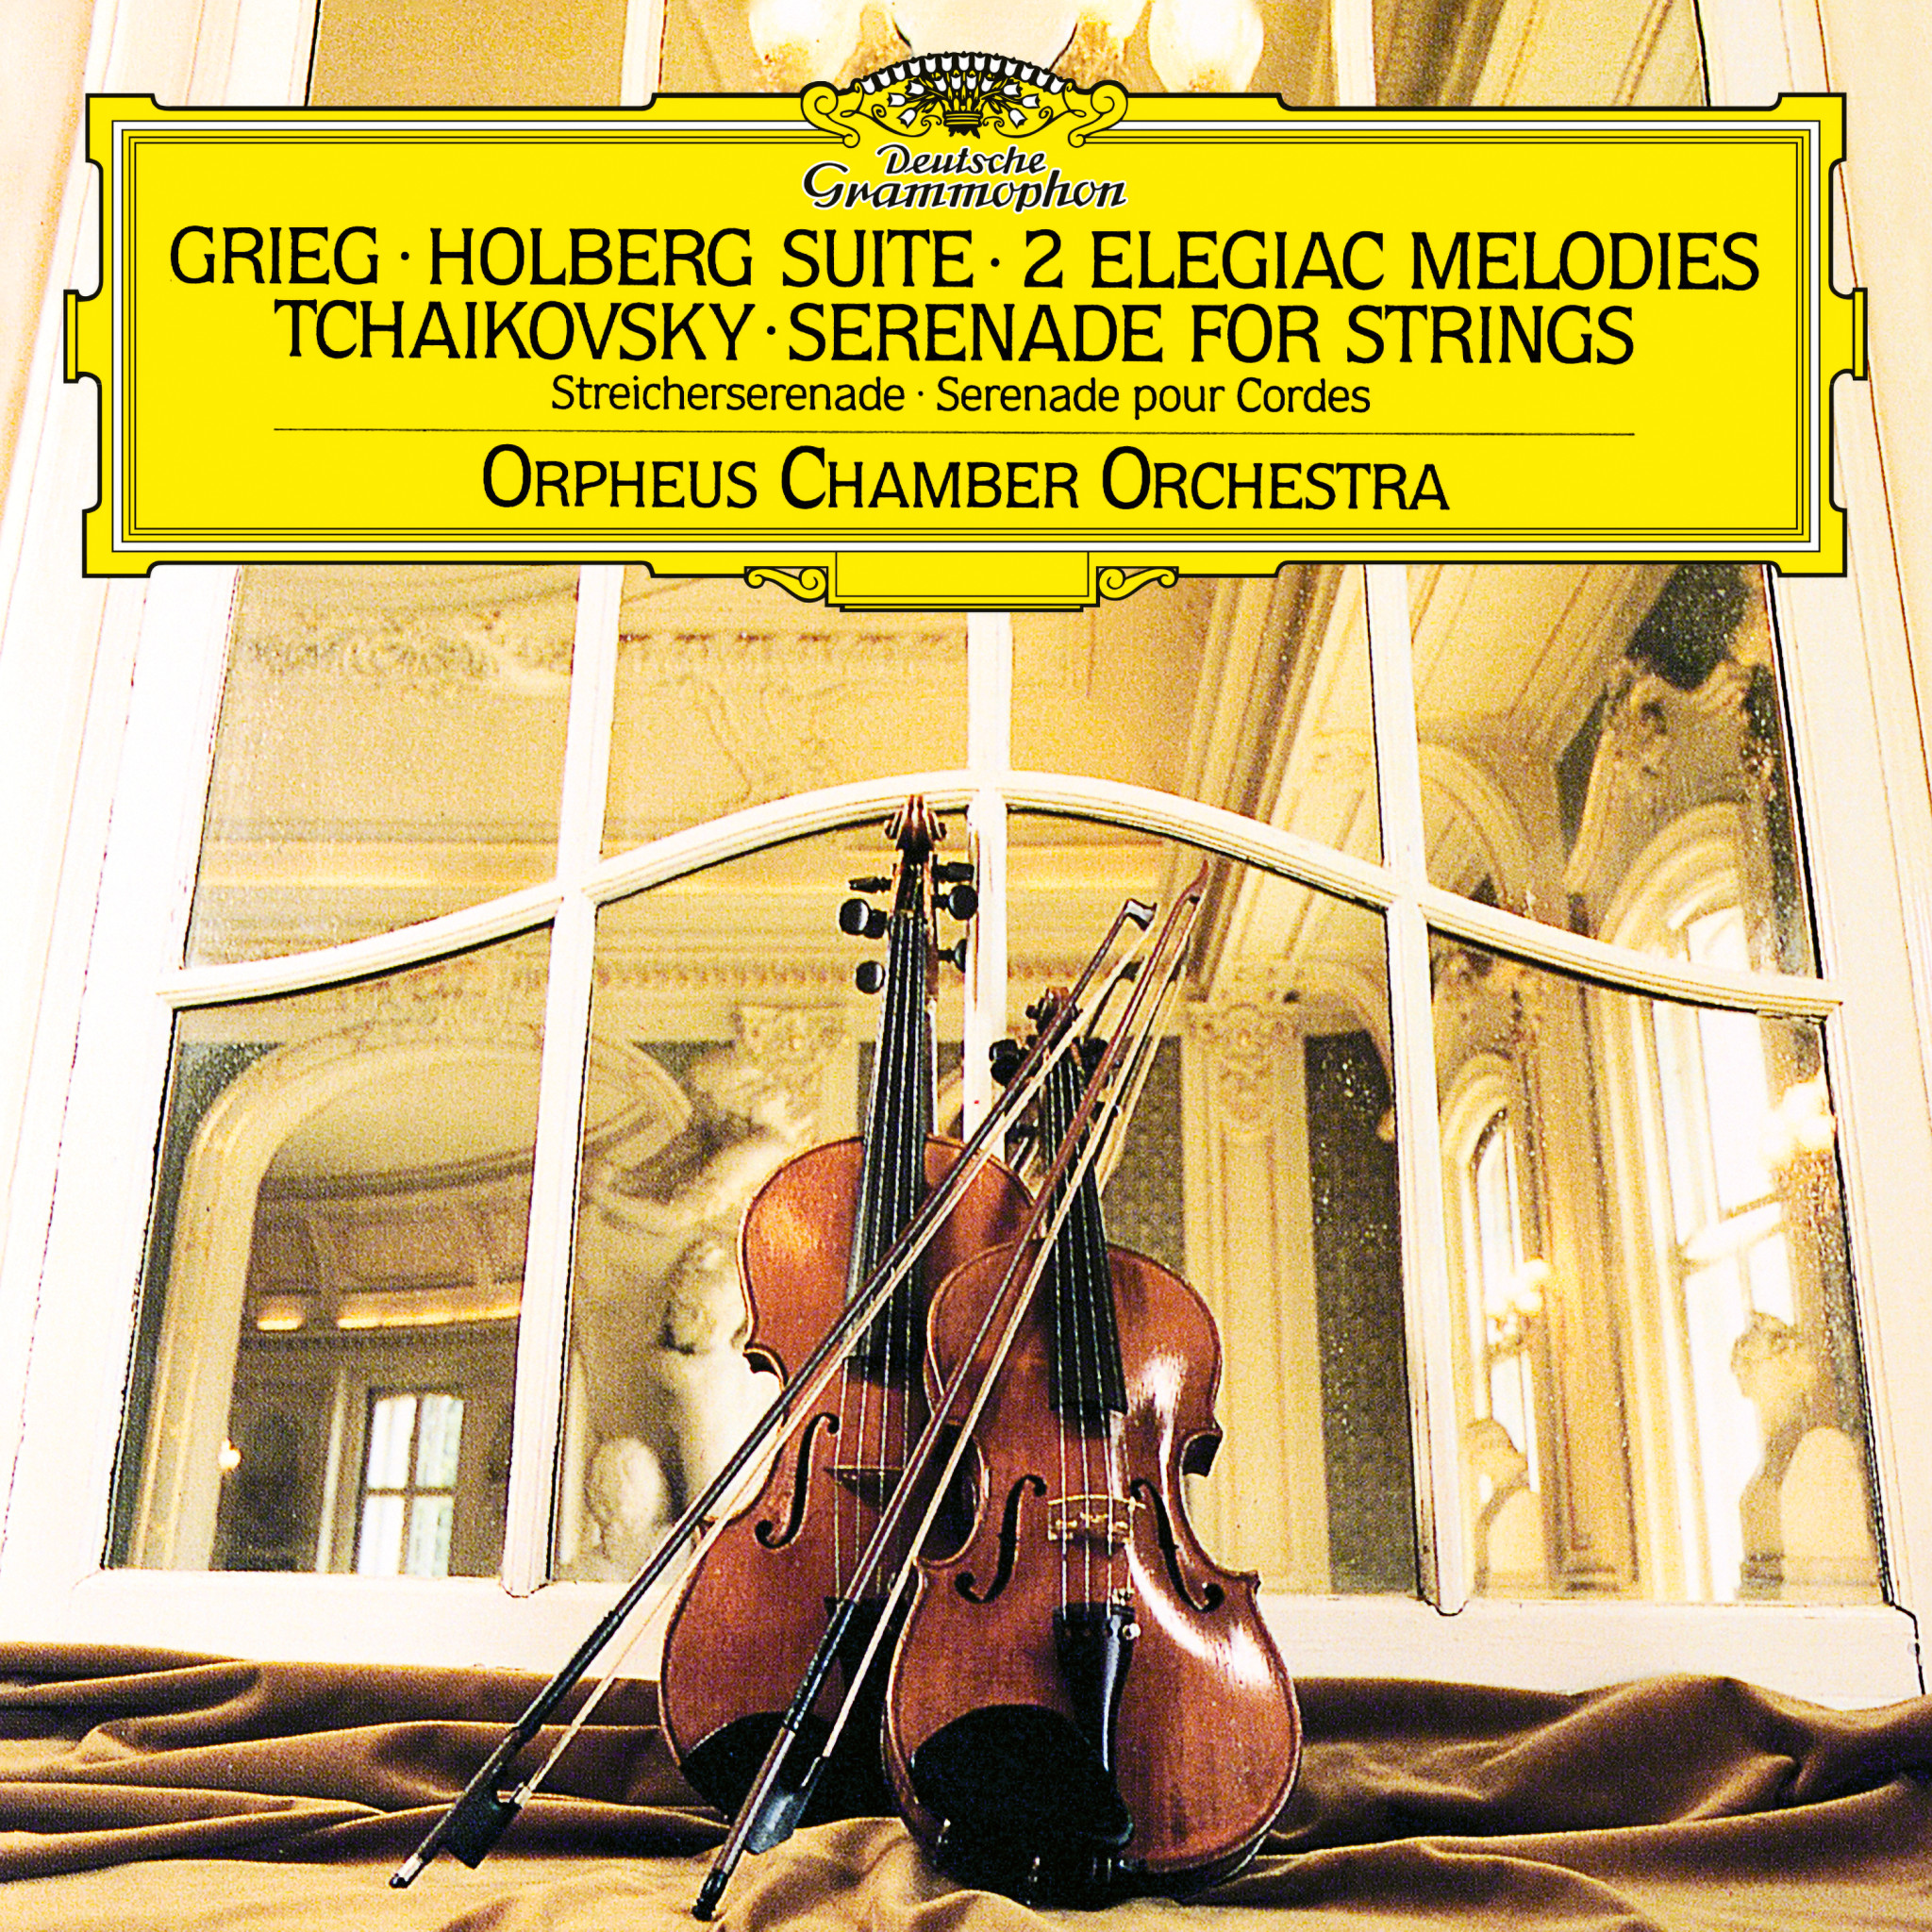 Orpheus Chamber Orchestra - Grieg: Holberg Suite, Two Elegiac Melodies; Tchaikovsky: Serenade for Strings eAlbum Cover